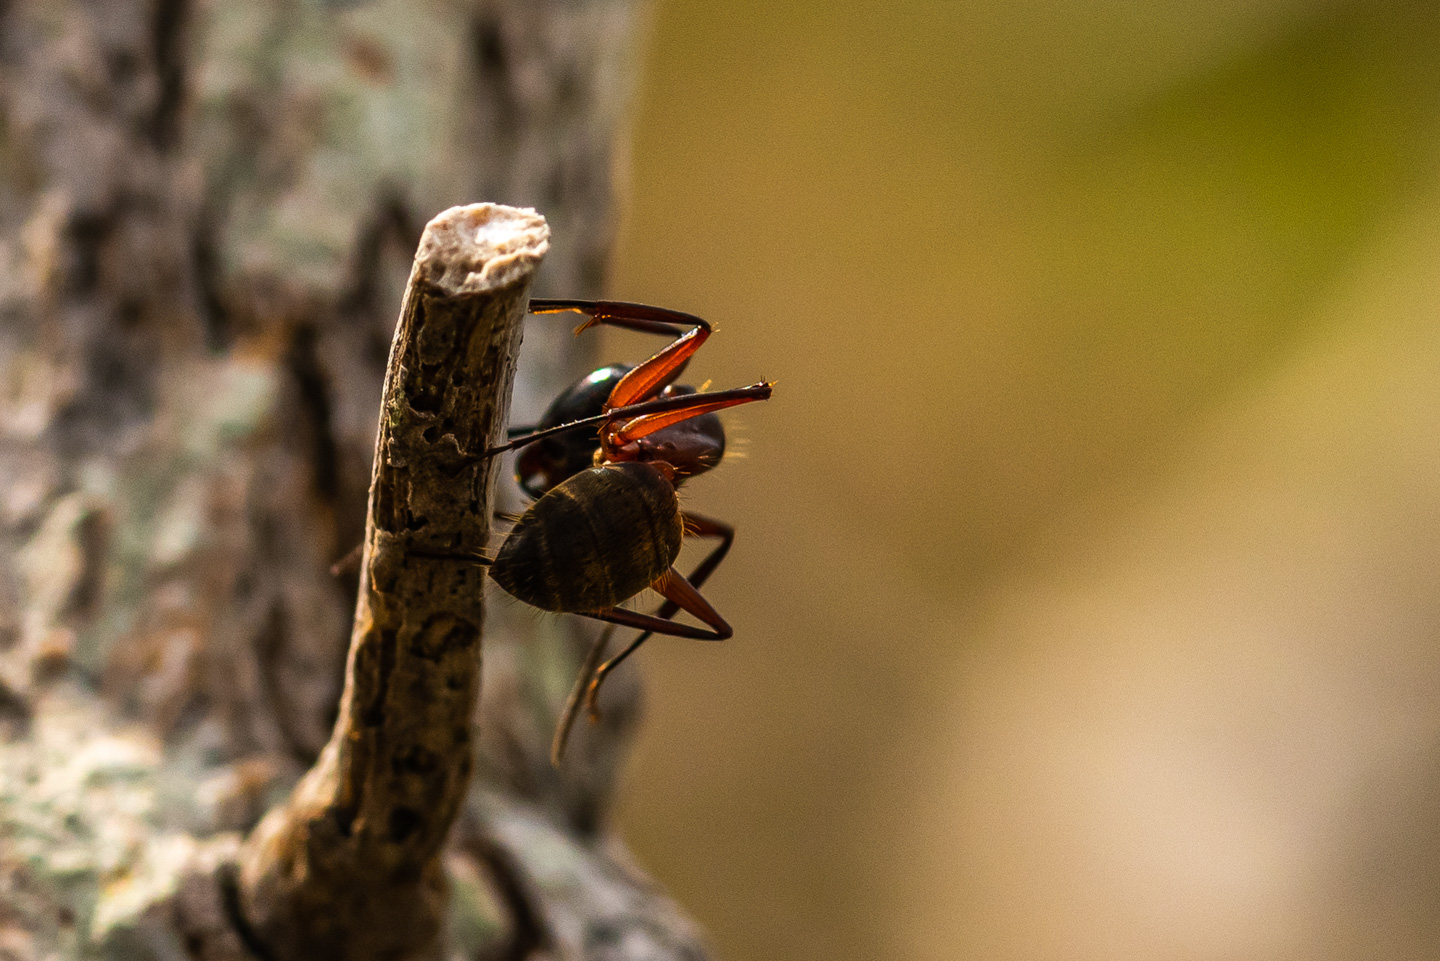 Black and Red Carpenter Ant